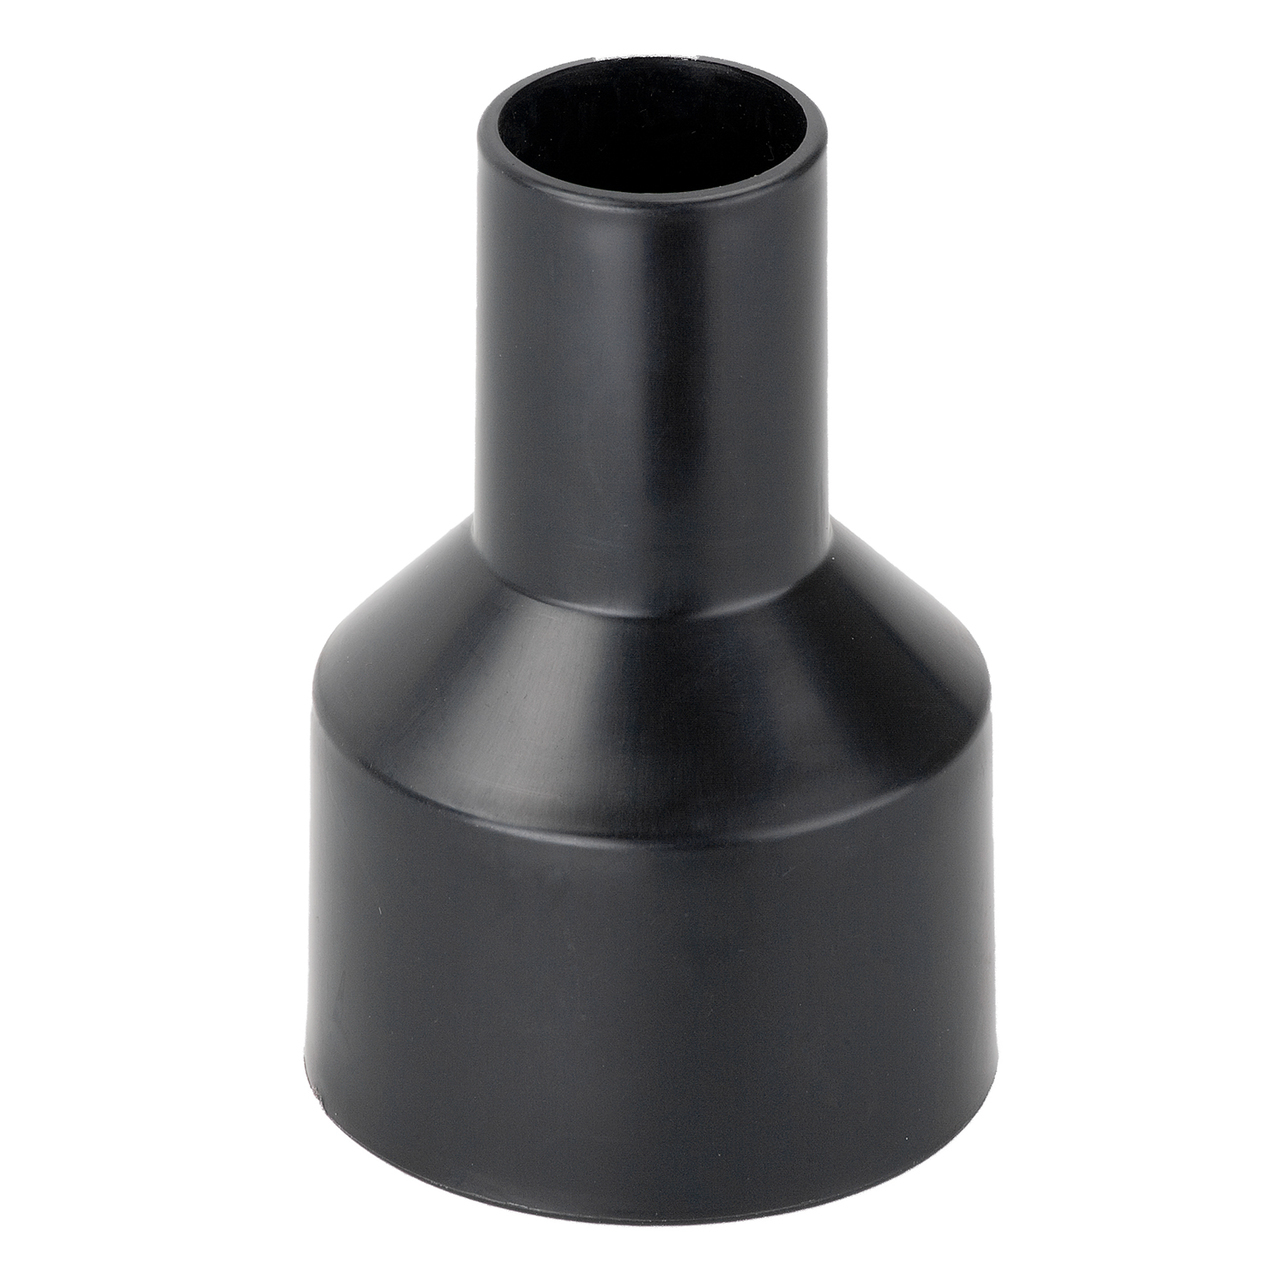 V21A Adapter, For: 2-1/2, 1-1/4 in Vacmaster Hose Systems